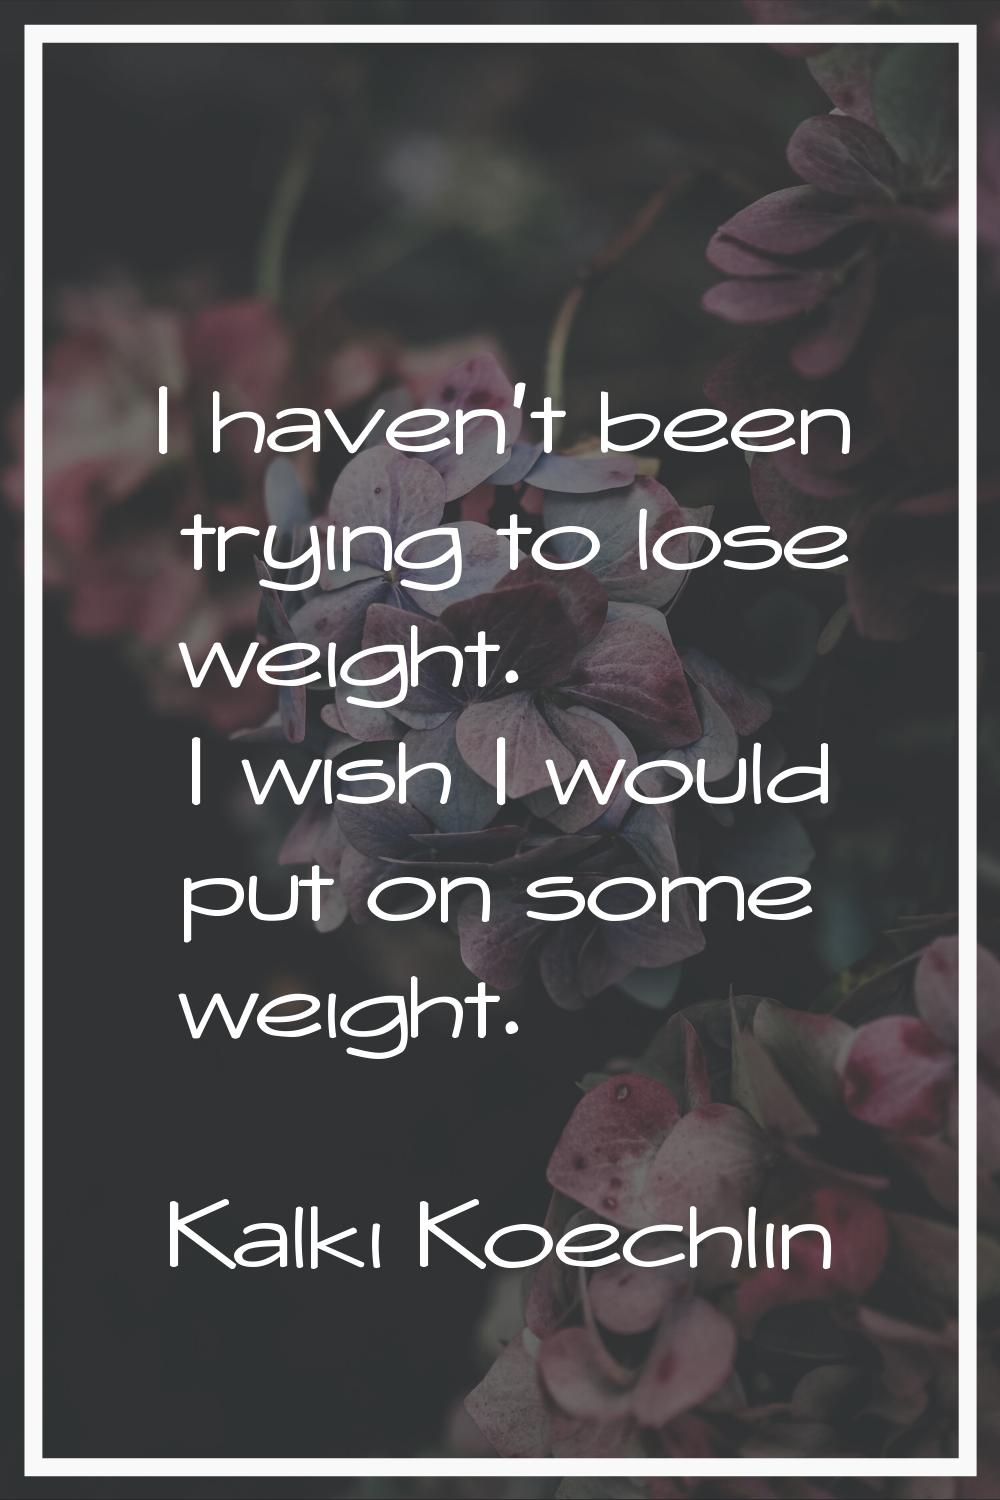 I haven't been trying to lose weight. I wish I would put on some weight.